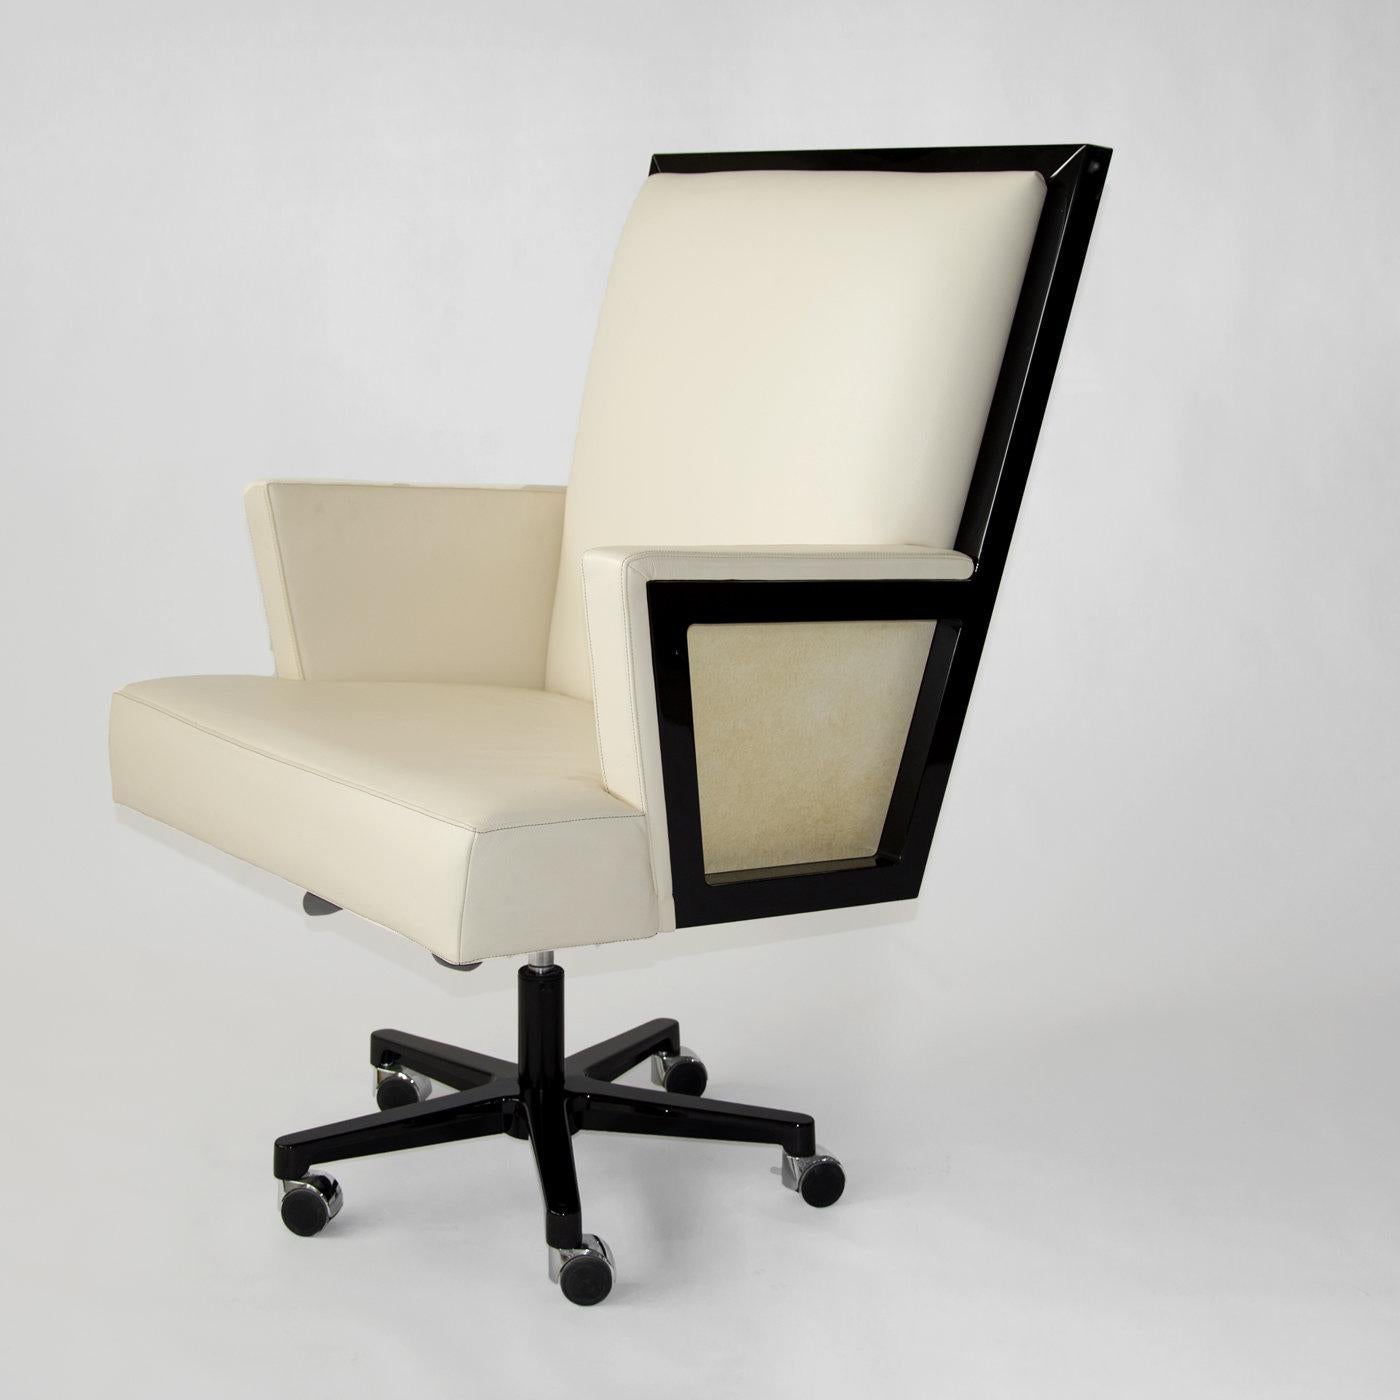 Cool style and glamor characterize the Rick Office Armchair with its clean lines and elegant design. Featuring black lacquered wood with panels (back and armrests) upholstered in natural matt parchment and a padded seat and interior in ivory